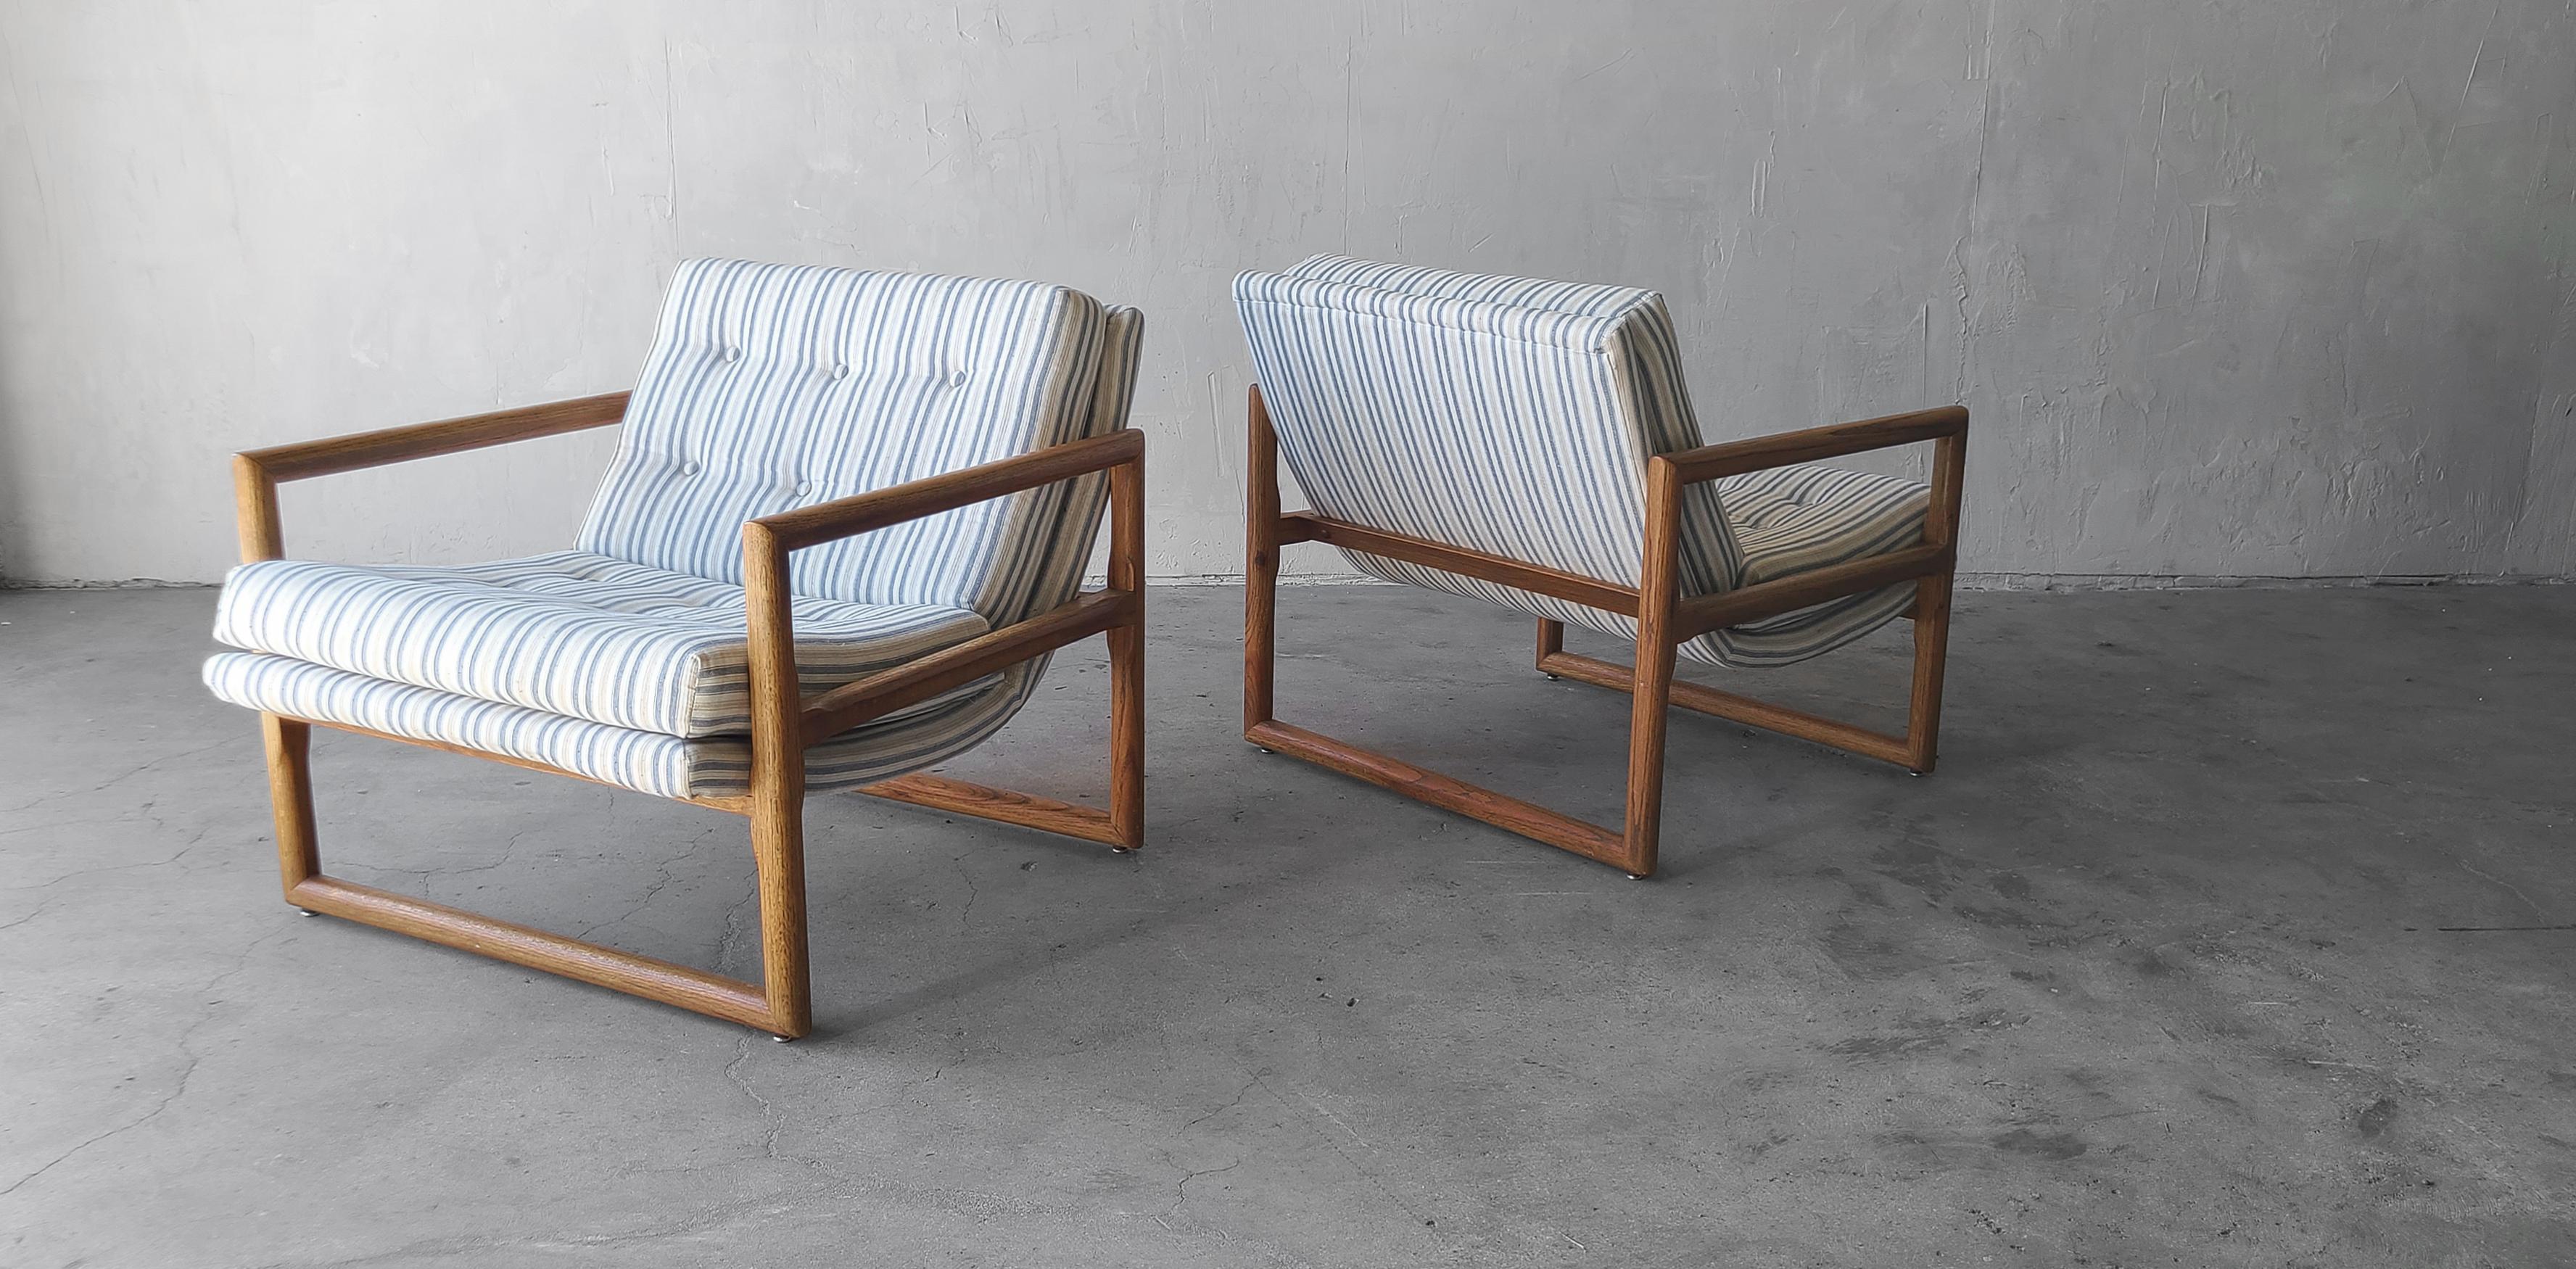 If you're looking for the perfect pair of Minimalist lounge chairs, look no further. This beautiful pair of oak Milo Baughman style scoop chairs are the perfect, simple clean line chairs for any decor space.

These chairs are structurally sound